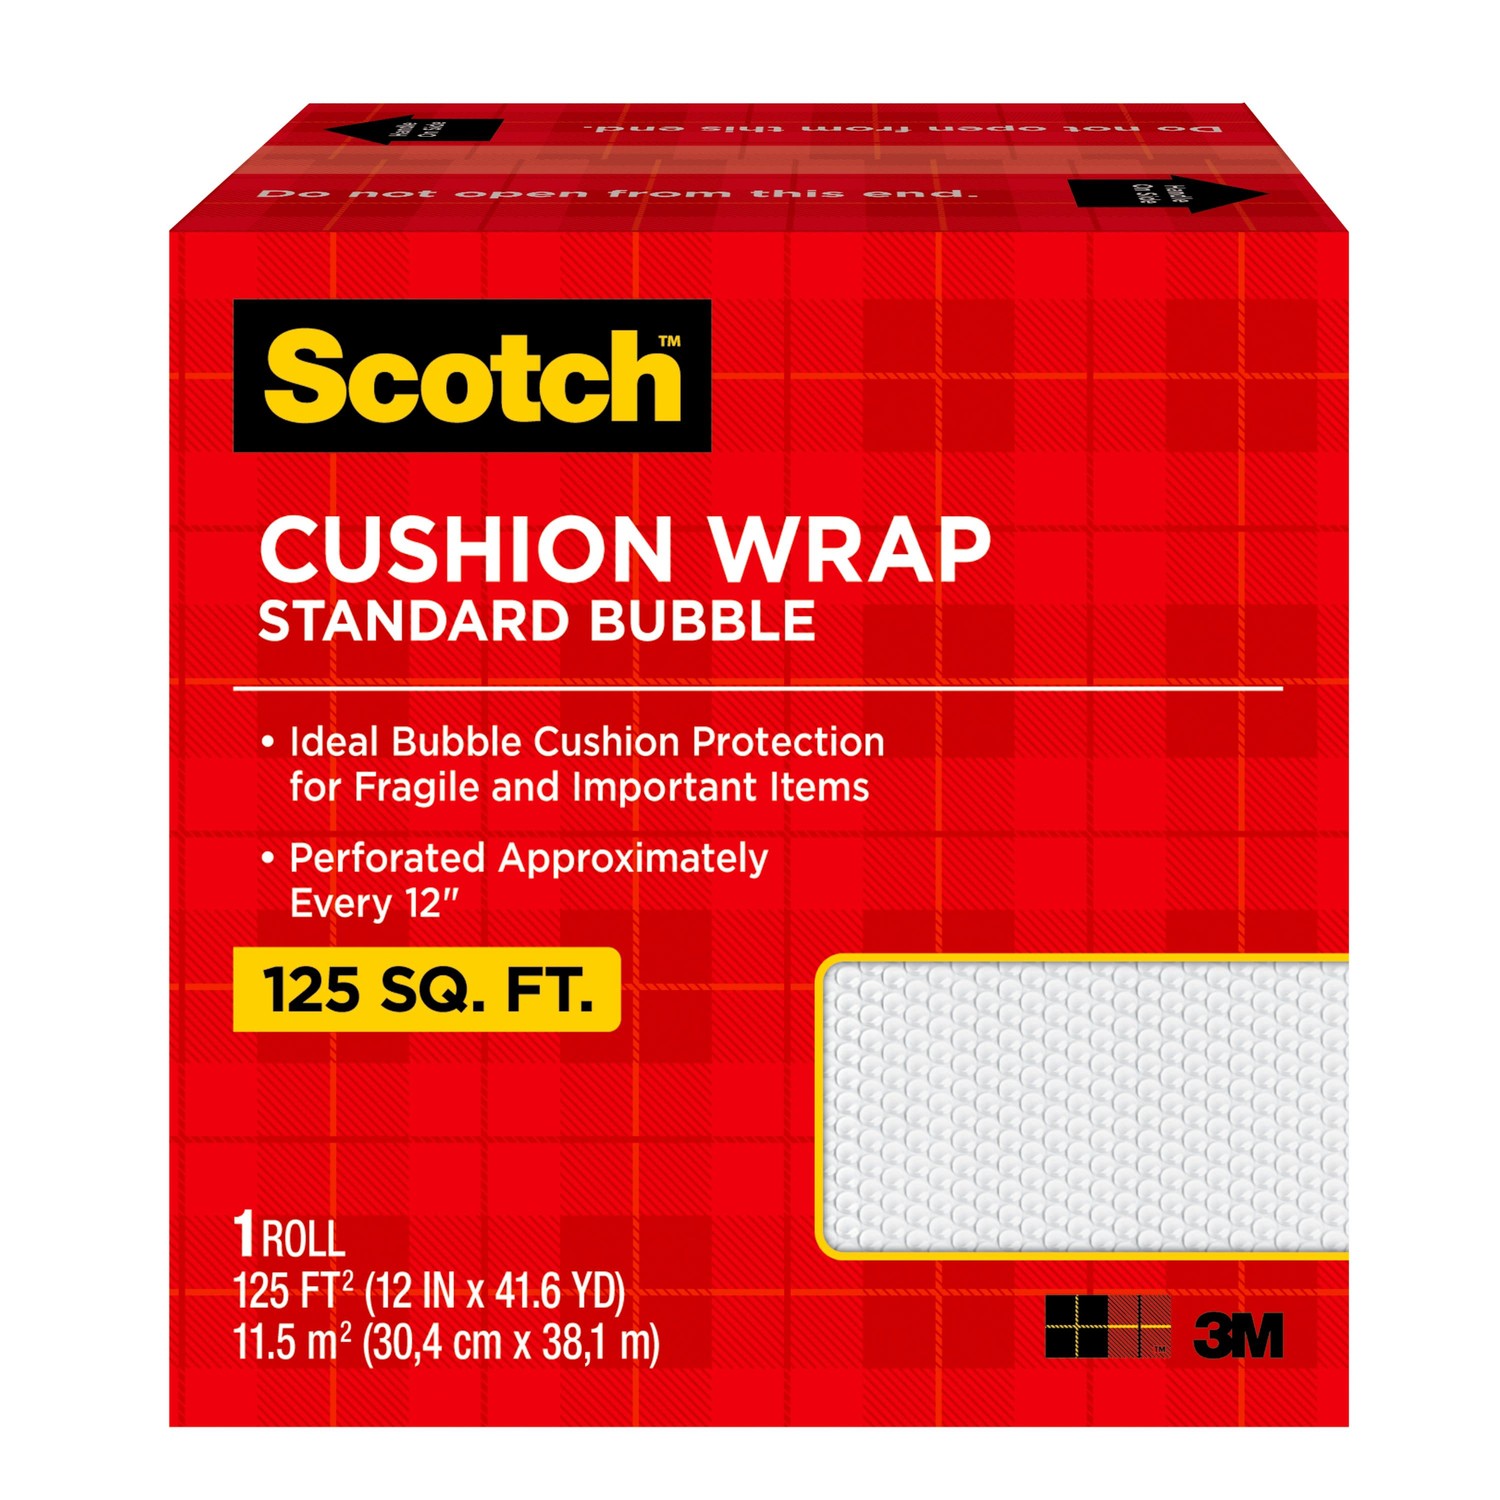 Scotch Cushion Wrap - 12" Width x 100 ft Length - Perforated, Lightweight, Recyclable, Non-scratching, Easy Tear - Polyethylene